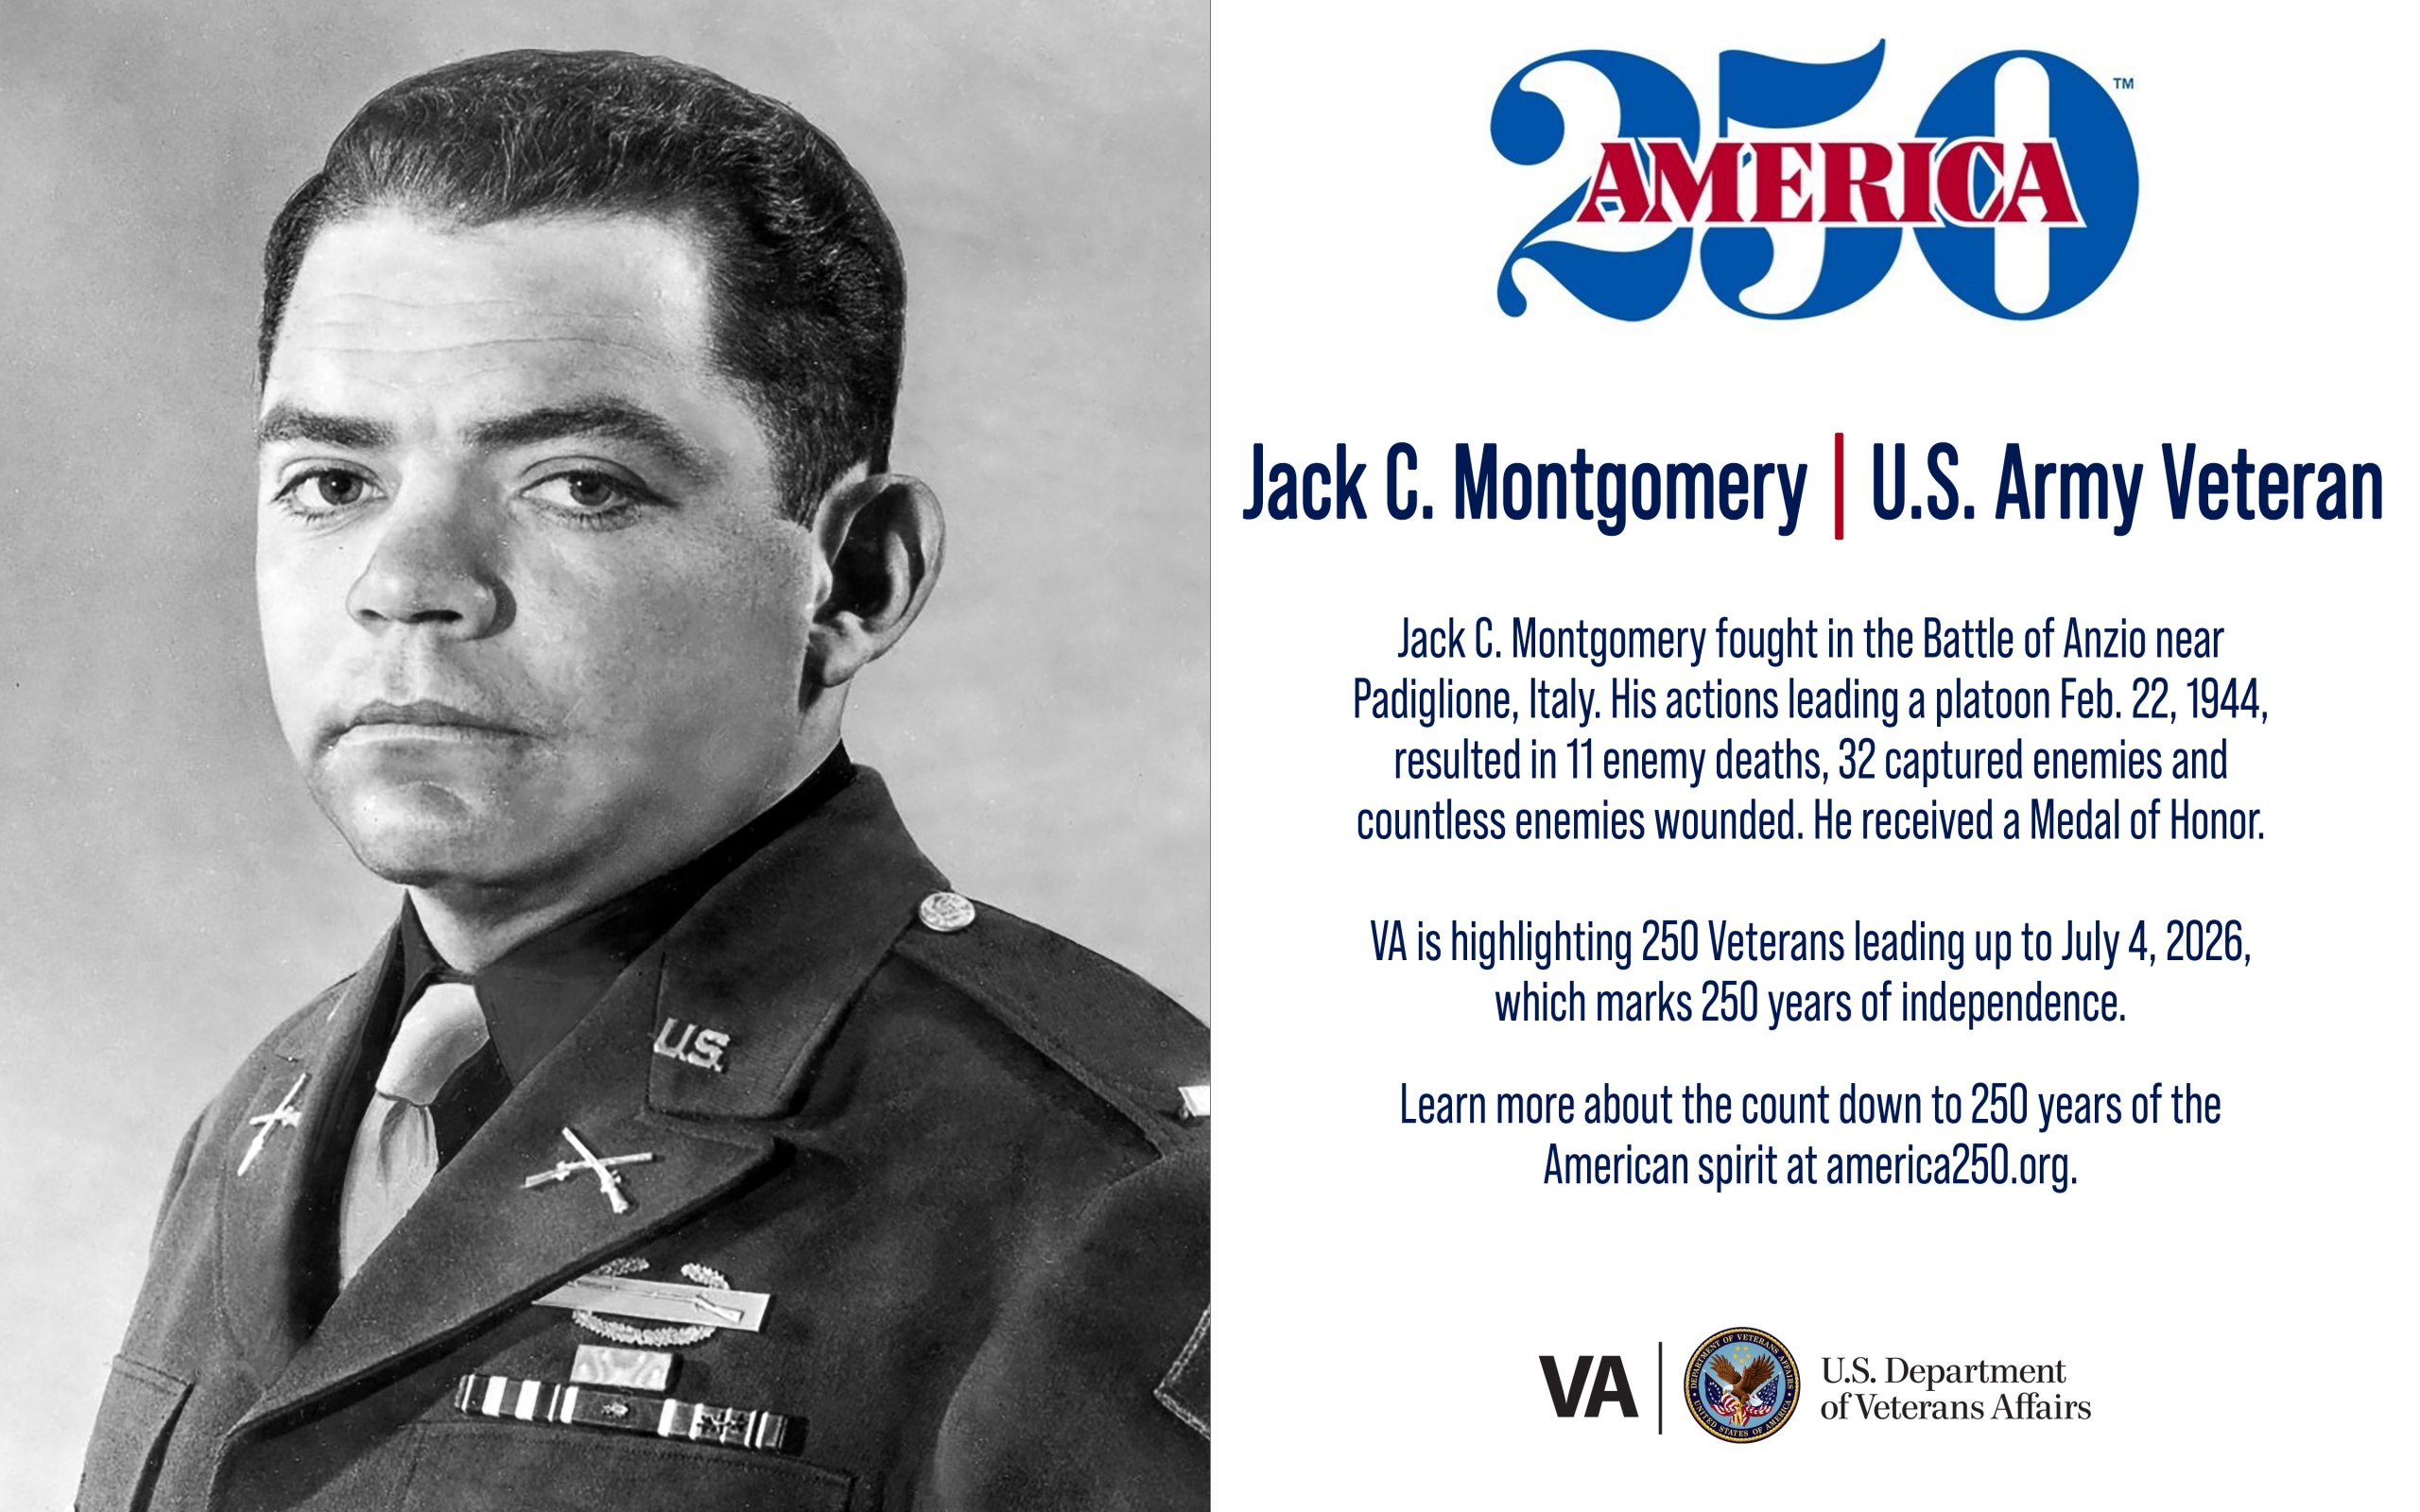 This week’s America250 salute is Army Veteran Jack C. Montgomery, who received a Medal of Honor for his actions in Italy during World War II.